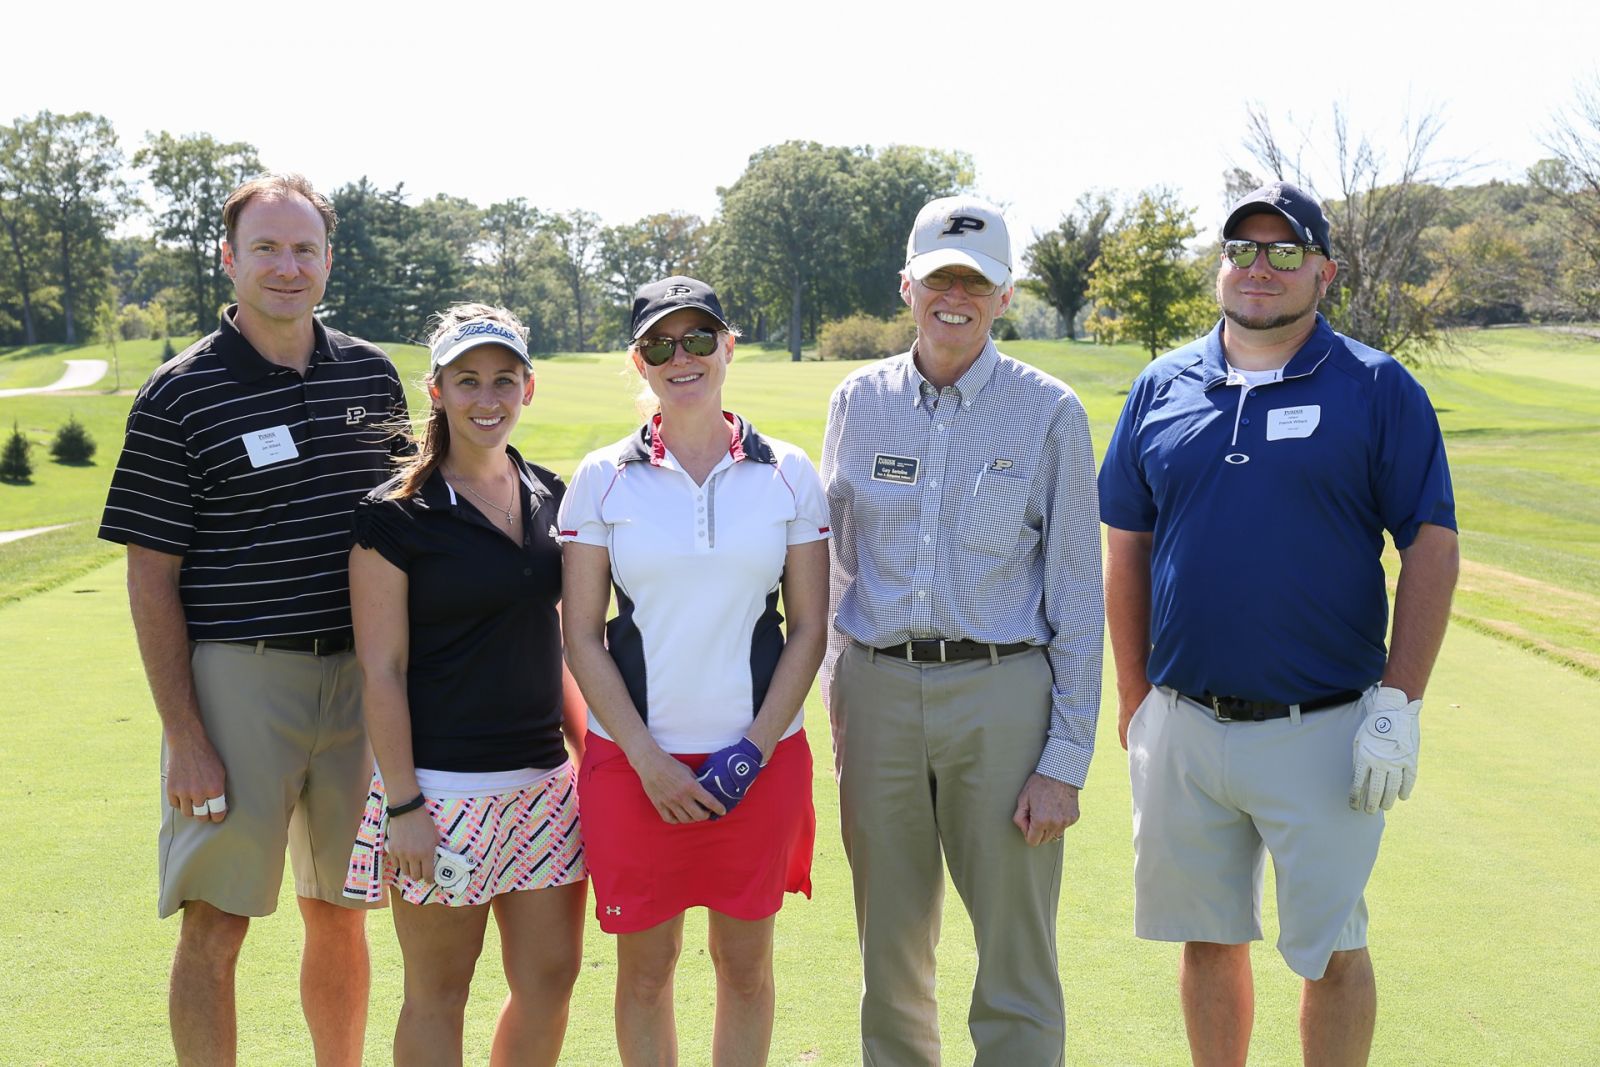 One of the teams at the 2017 Tech Pride Golf Scramble, with Gary Bertoline (second from right)